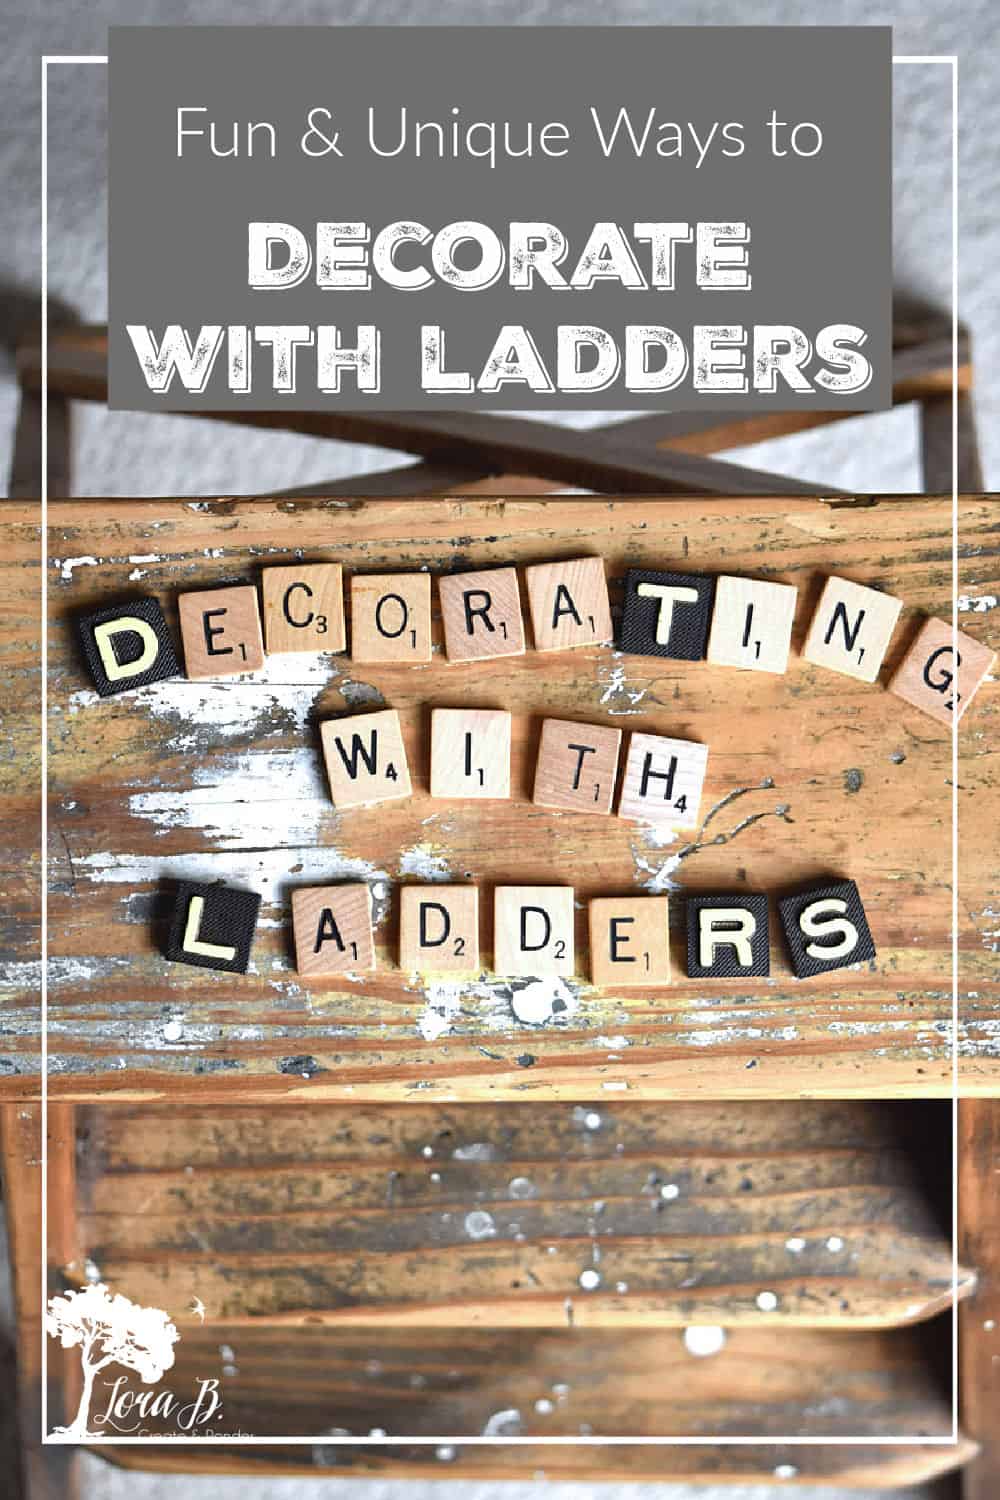 Fun and Unique Ways to Decorate with Vintage Ladders